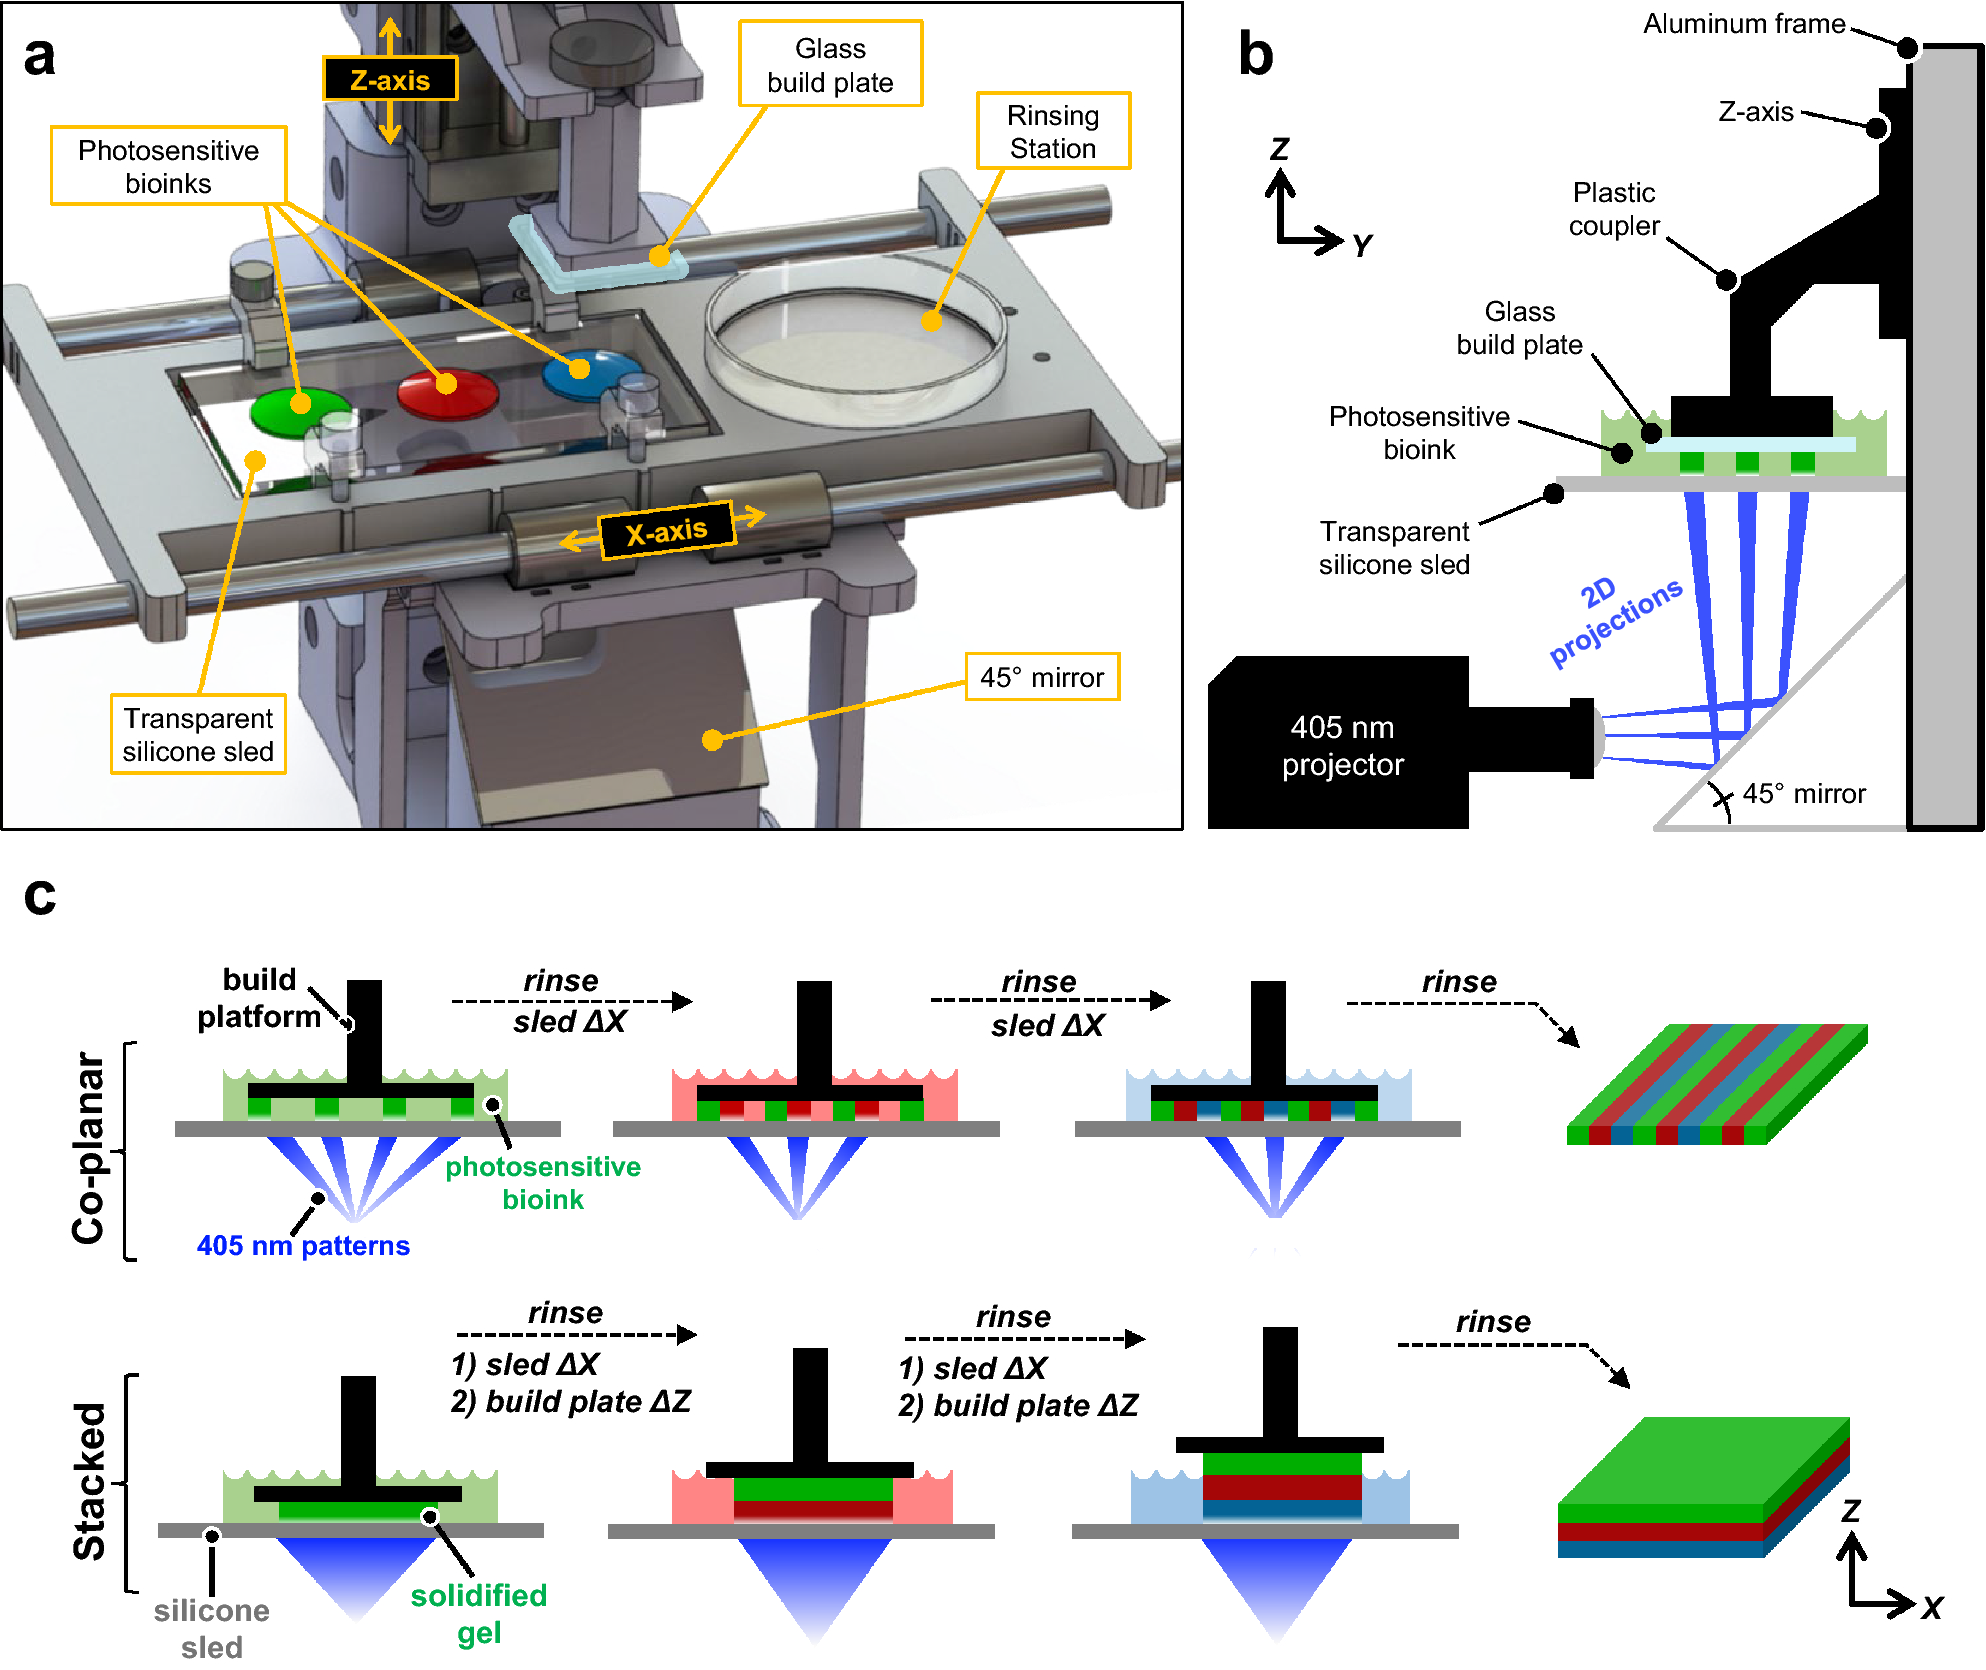 Development, characterization, and applications of multi-material  stereolithography bioprinting | Scientific Reports